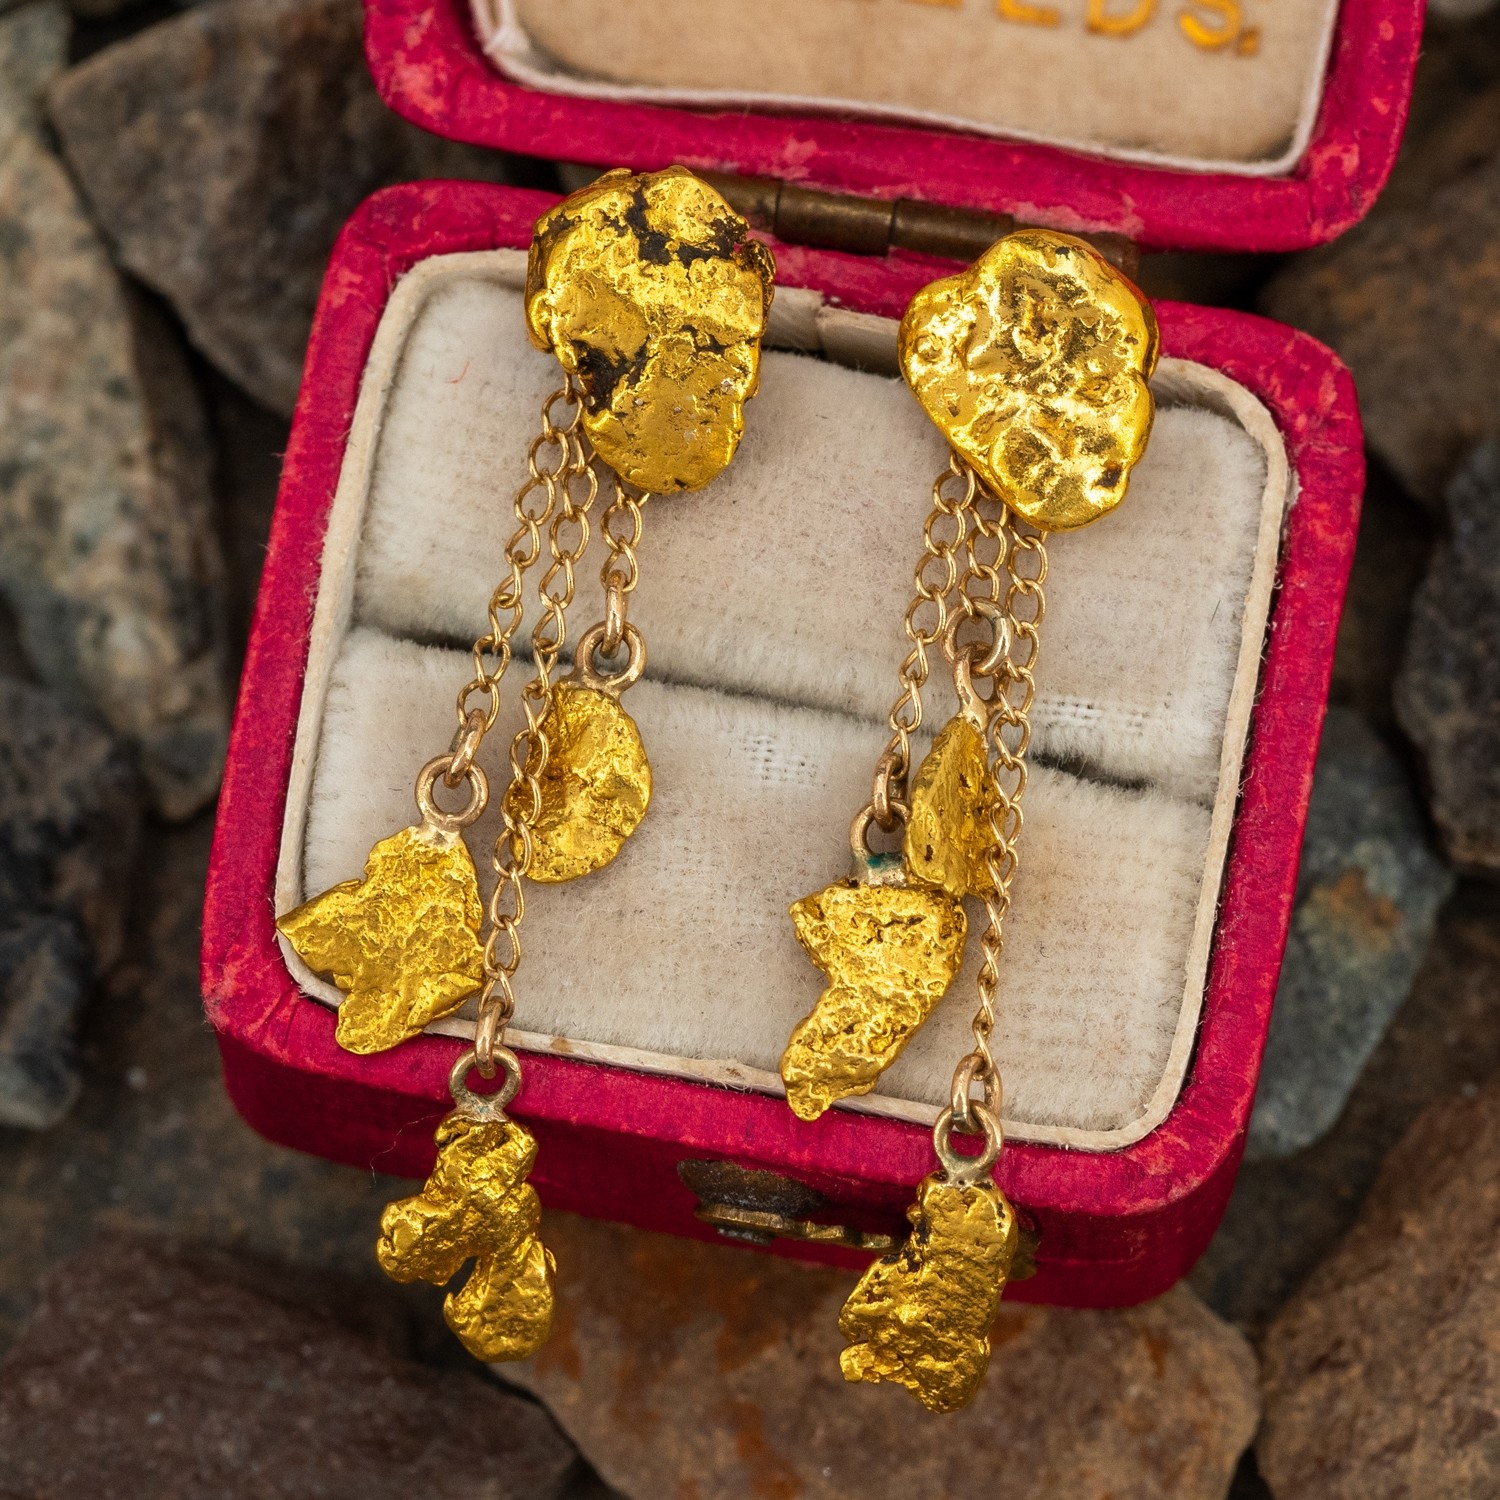 Where Can I Sell Gold Nuggets?, Vintage, Antique, High Quality